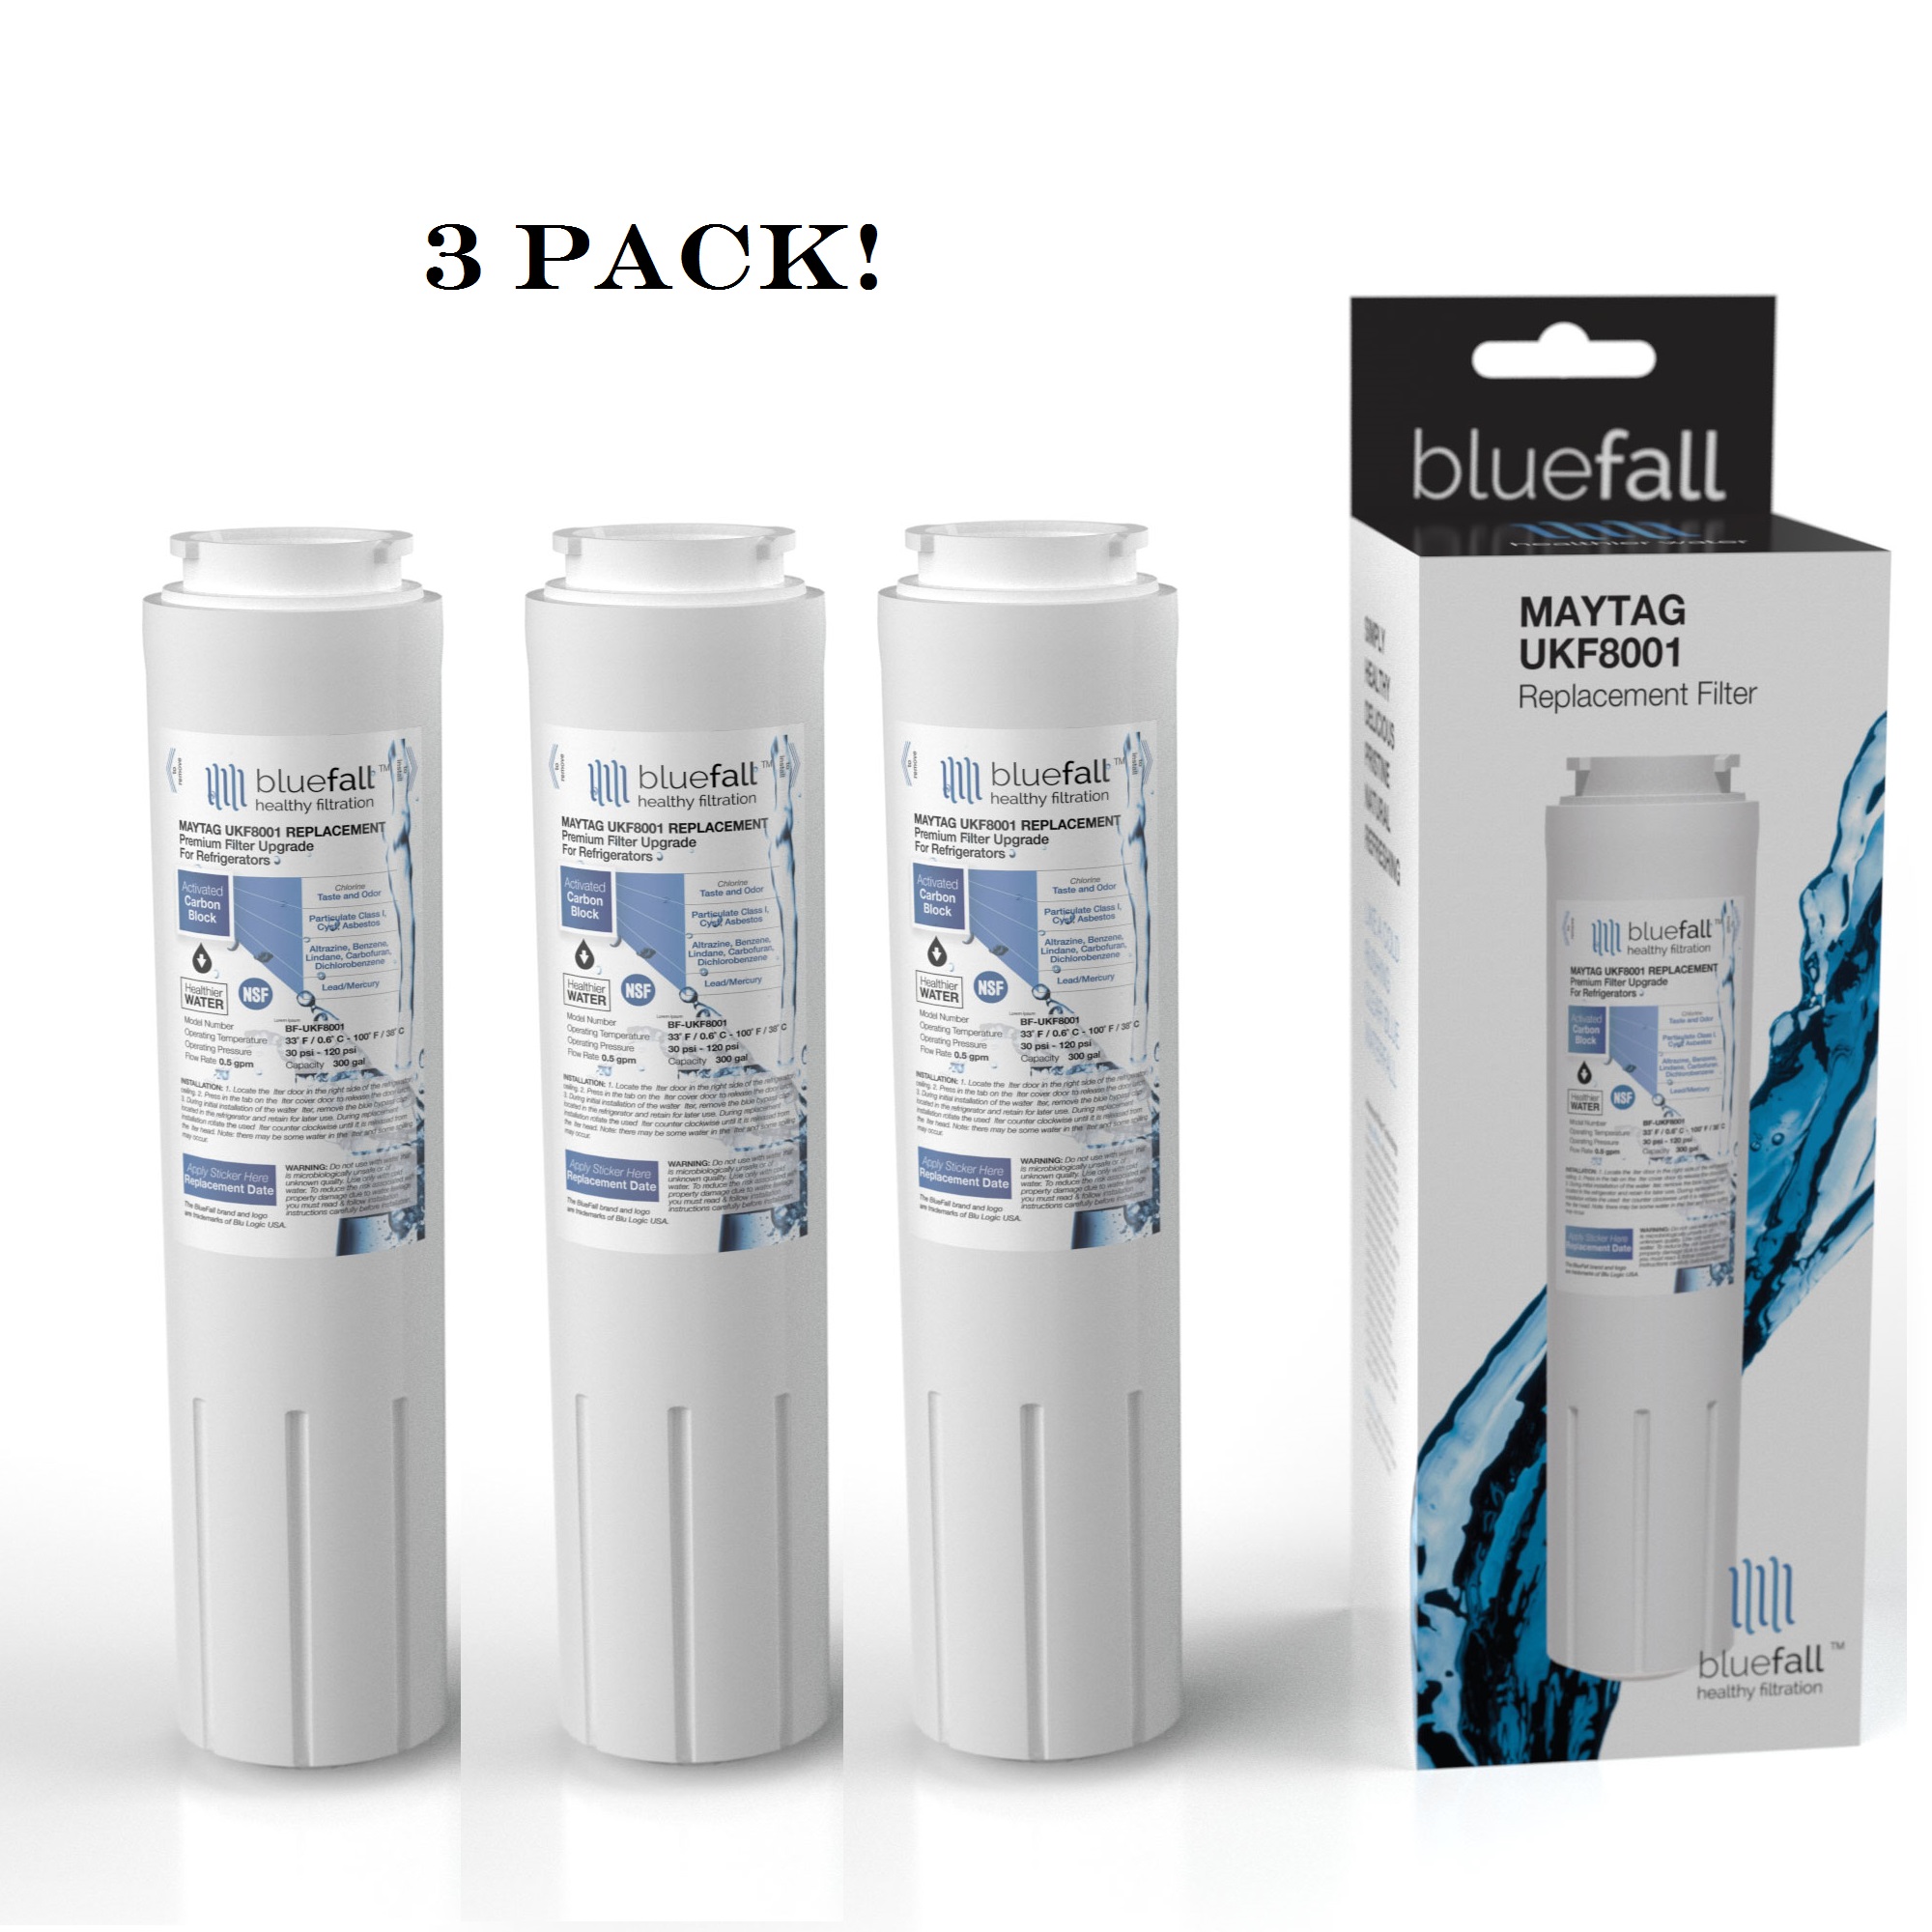 Maytag UKF8001 Refrigerator Water Filter. Compatible Replacement Refrigerator Water Filter for Maytag UKF8001 by Bluefall - VALUE PACK 3 - image 1 of 6